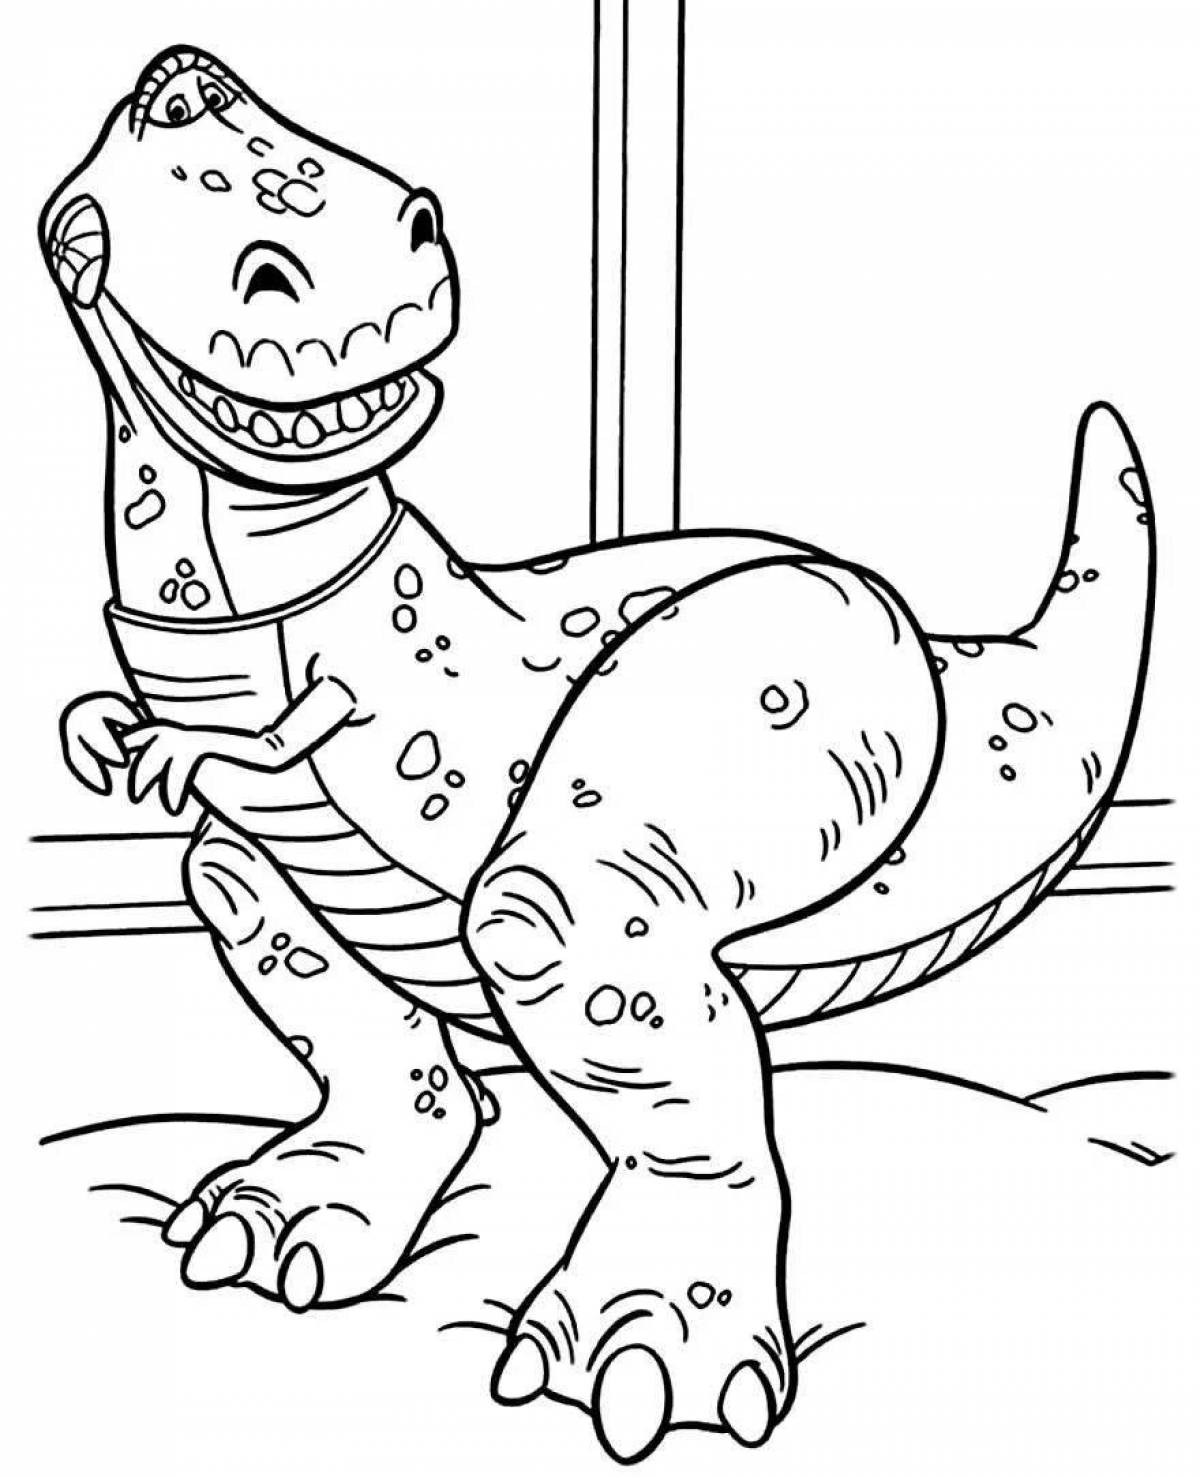 Dinosaur adventure coloring pages